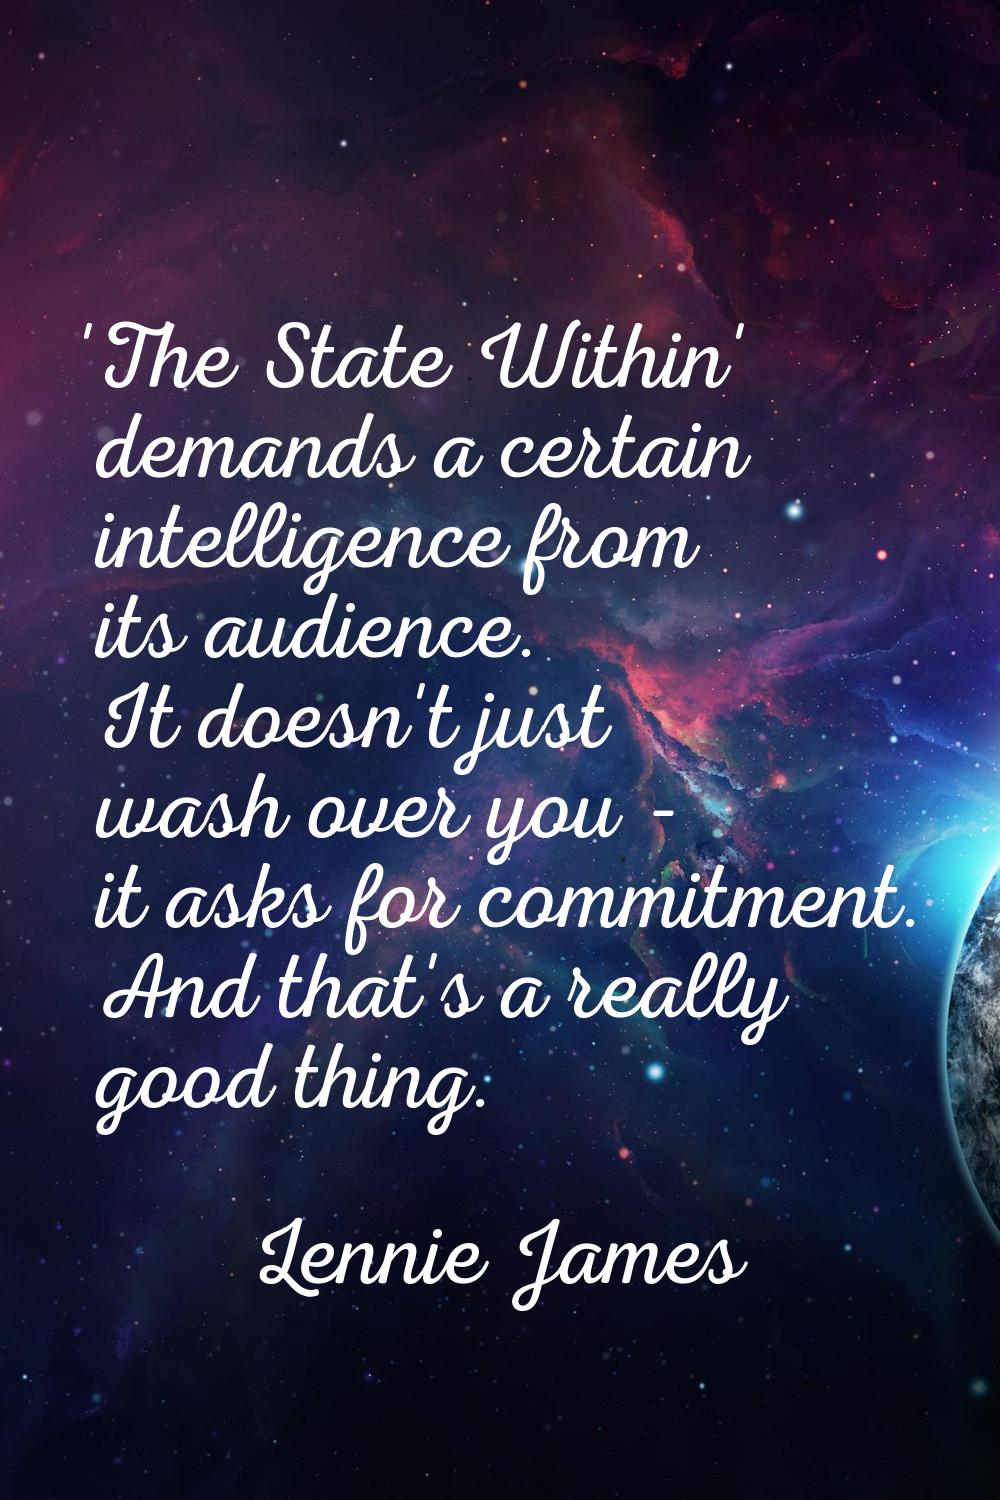 'The State Within' demands a certain intelligence from its audience. It doesn't just wash over you 